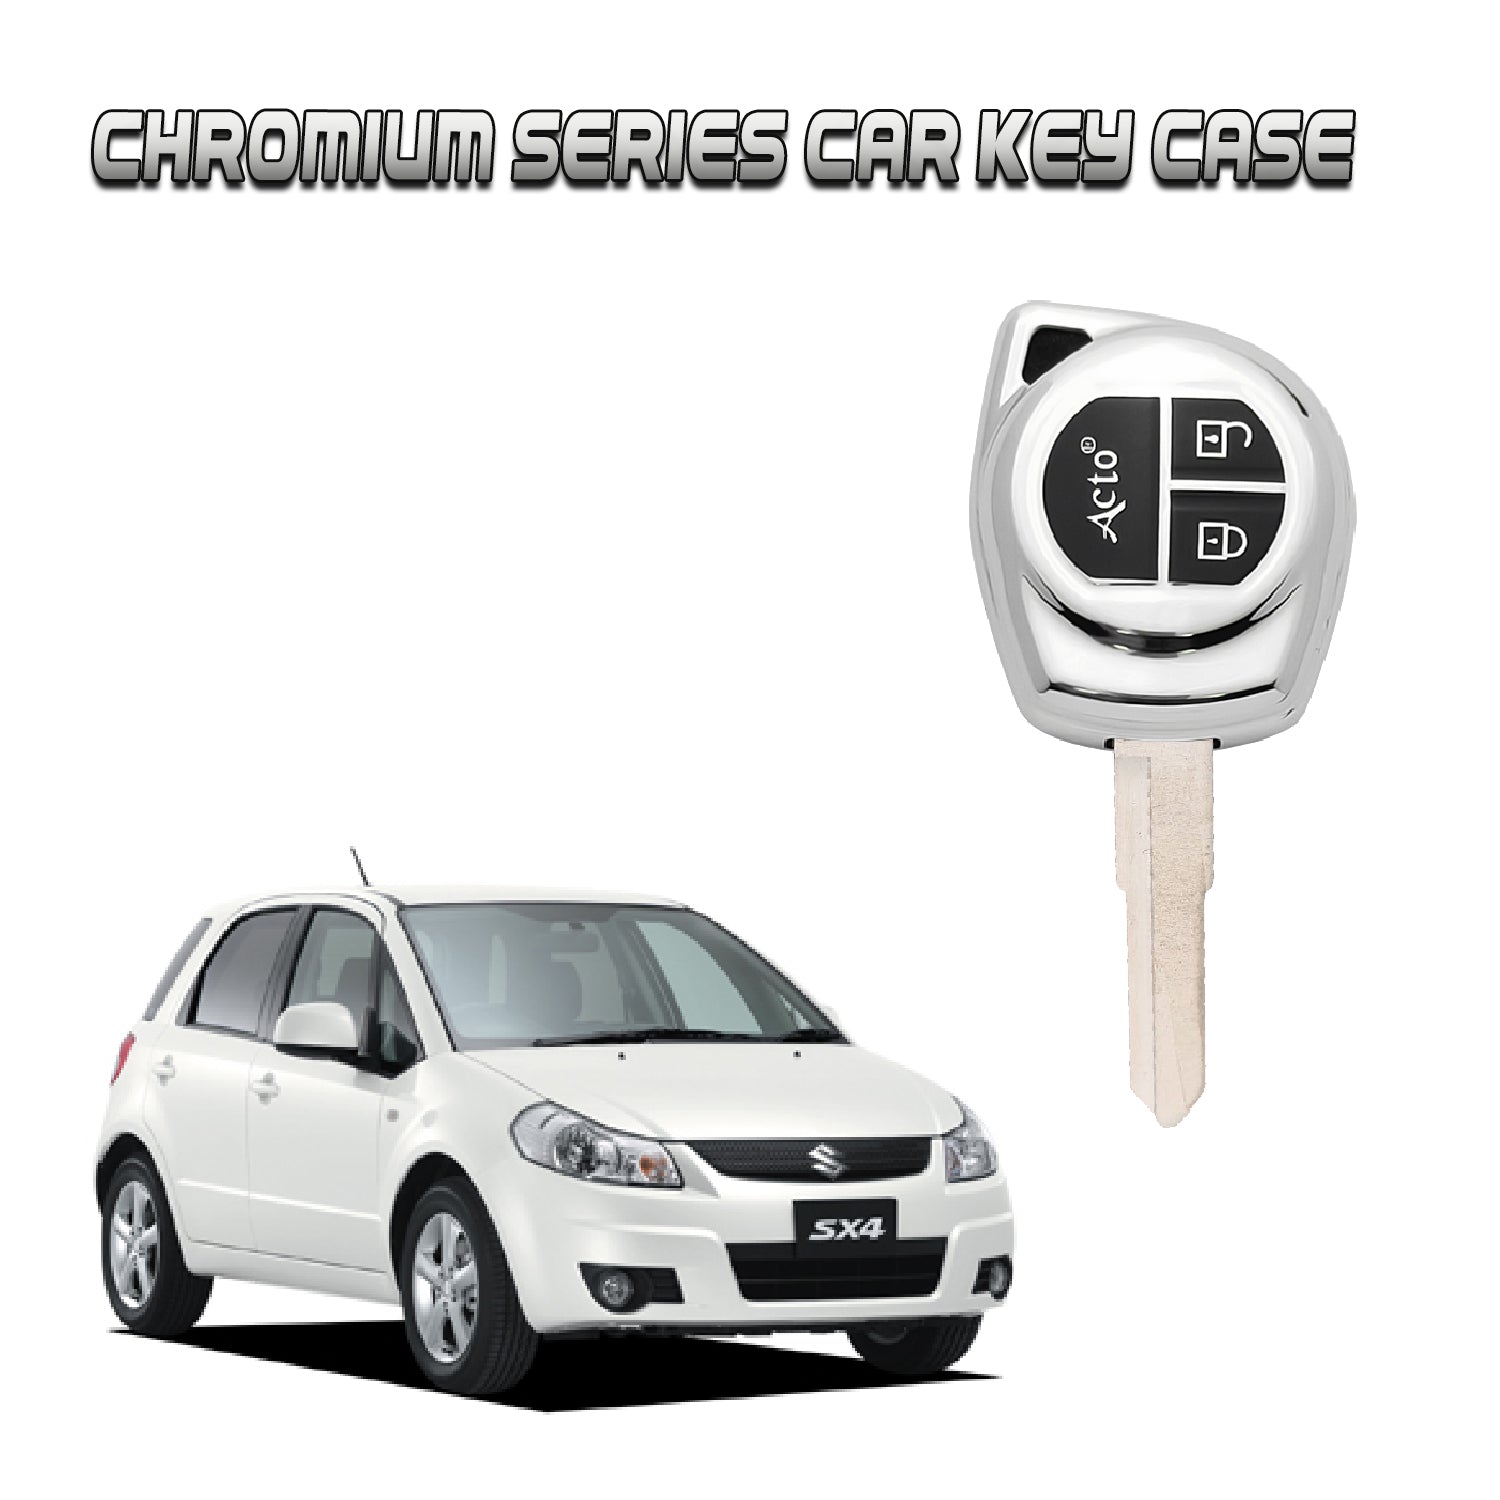 Acto Car Key Cover Chromium Series Compatible with SX4